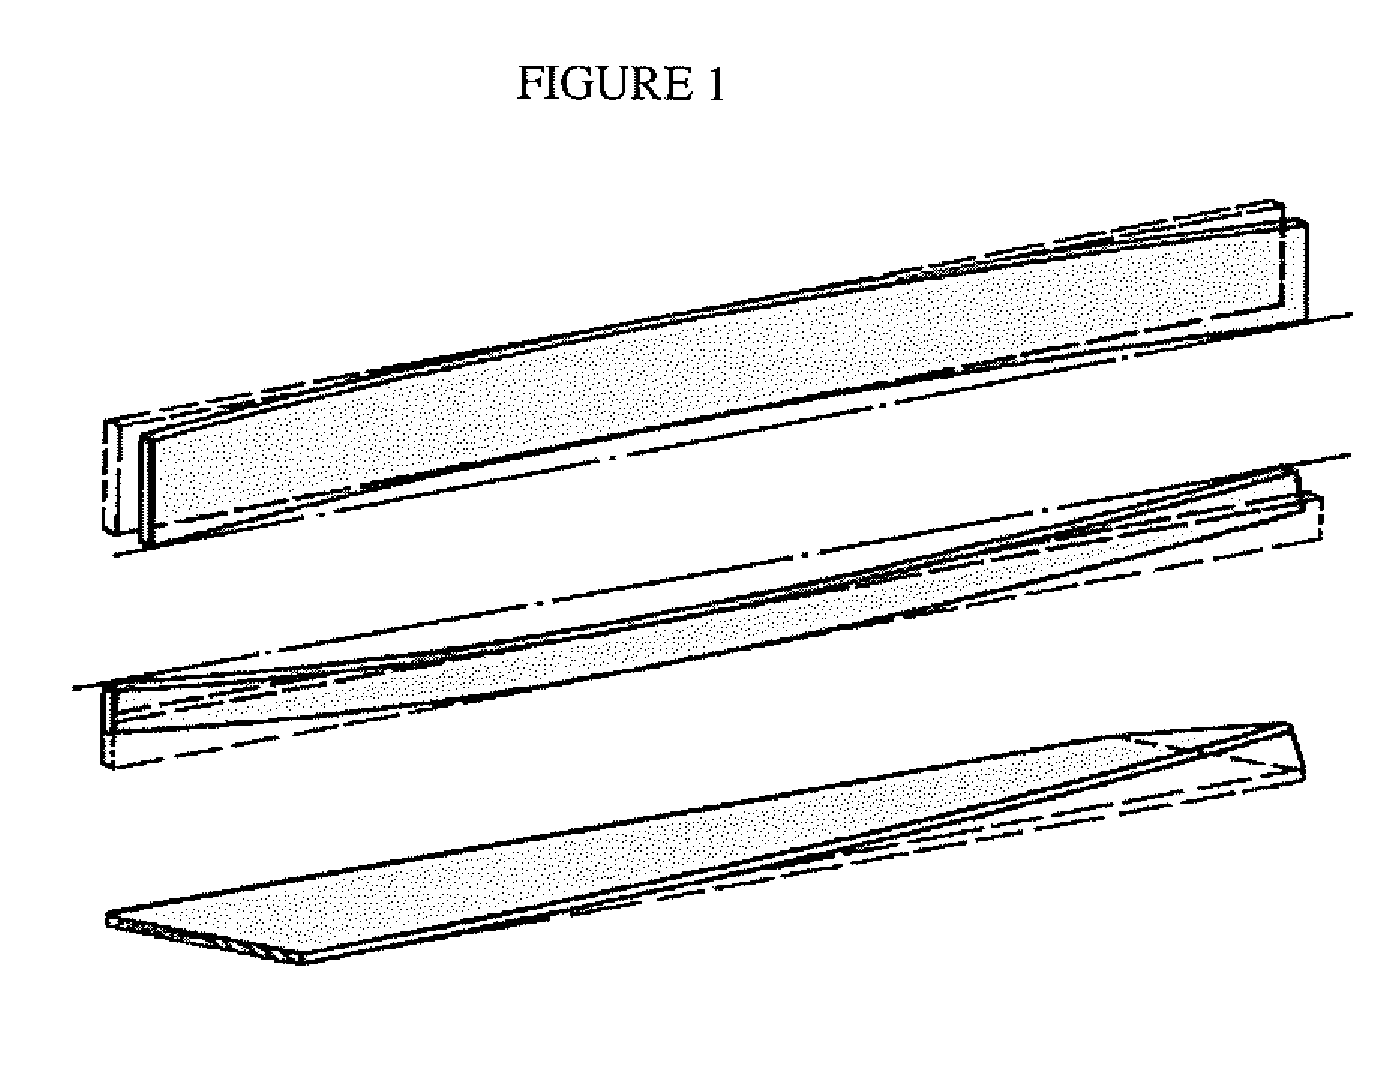 Methods for predicting dimensional stability of a wood product based on differential characteristics